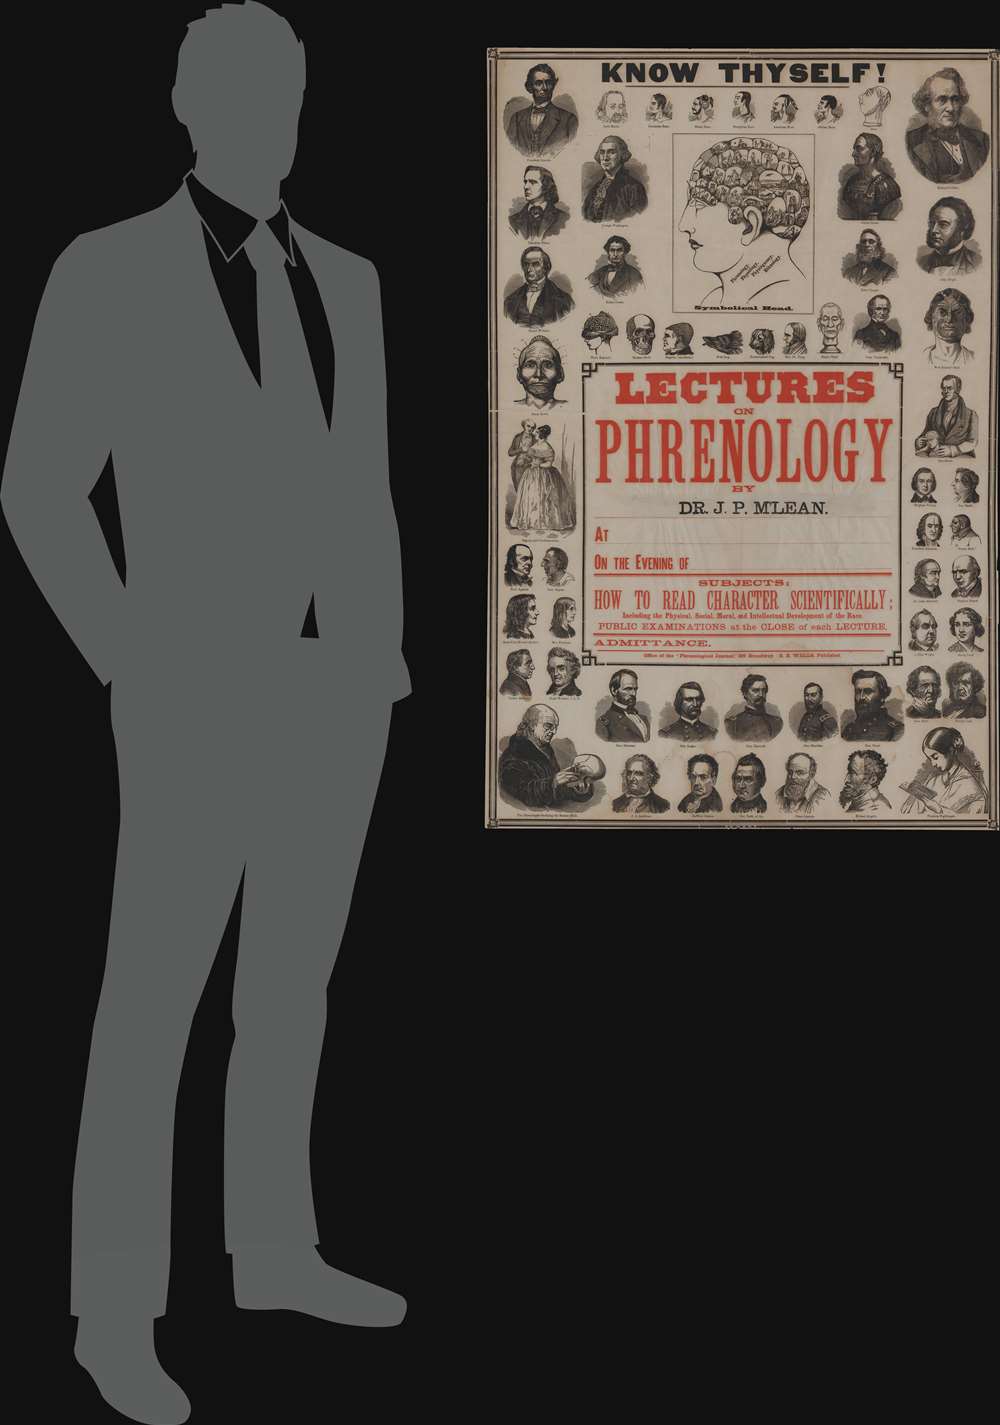 Know Thyself! Lectures on Phrenology by Dr. J. P. M'Lean. - Alternate View 1